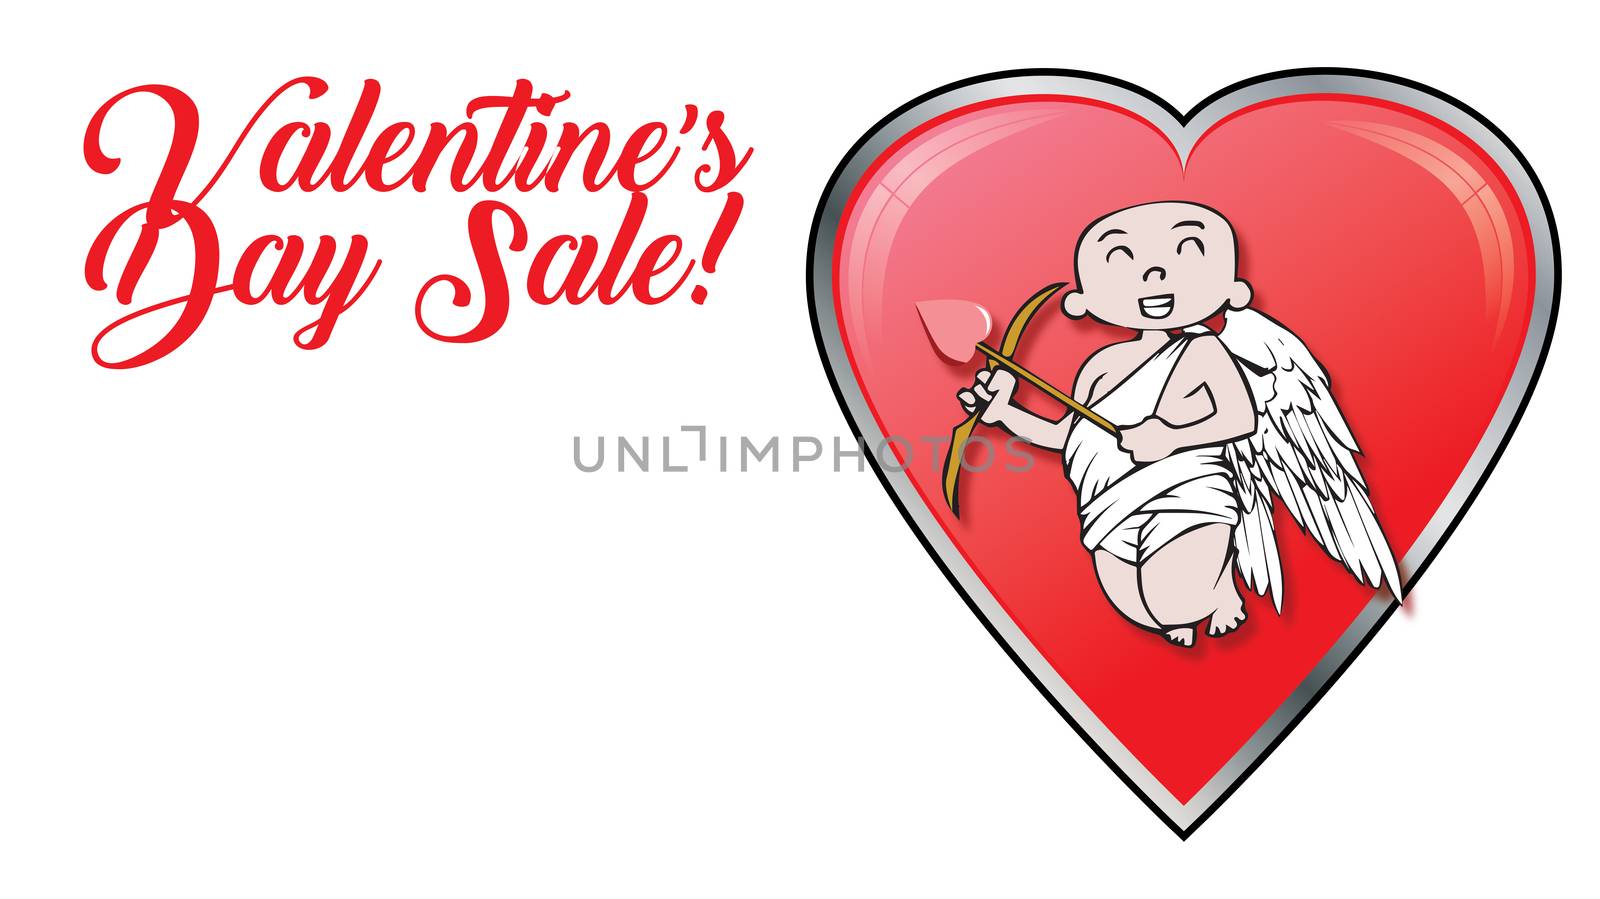 Cupids with Valentines Day Sale retail logo and hearts by illstudio